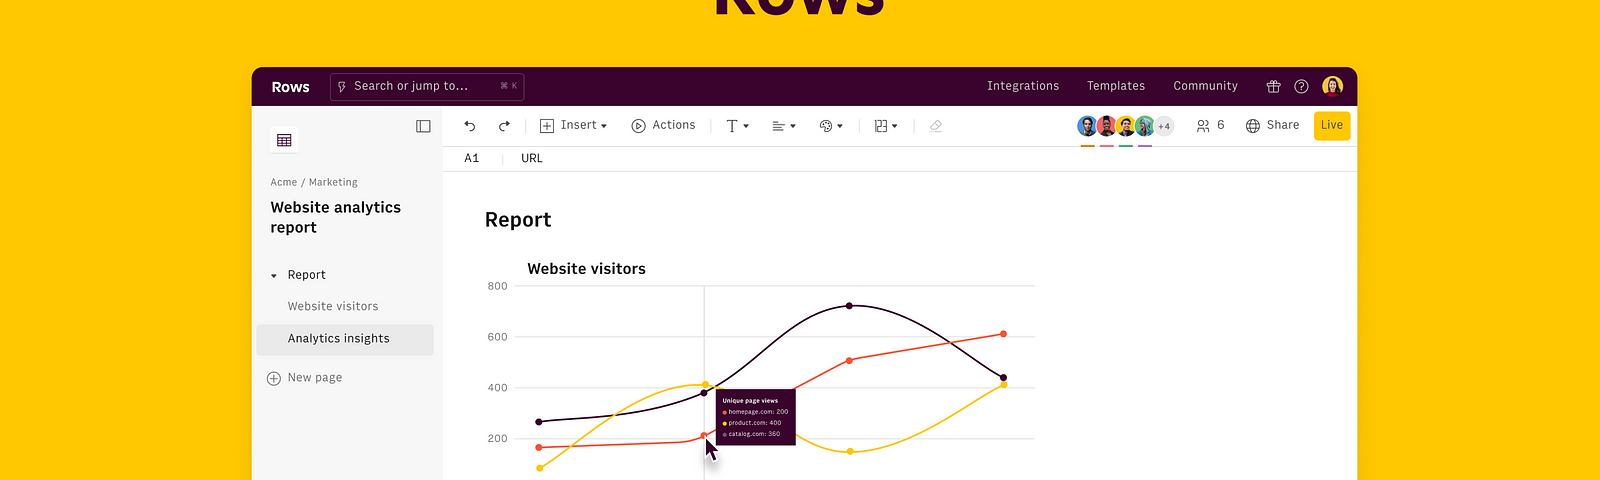 Website analytics report built using Rows, including chart and table